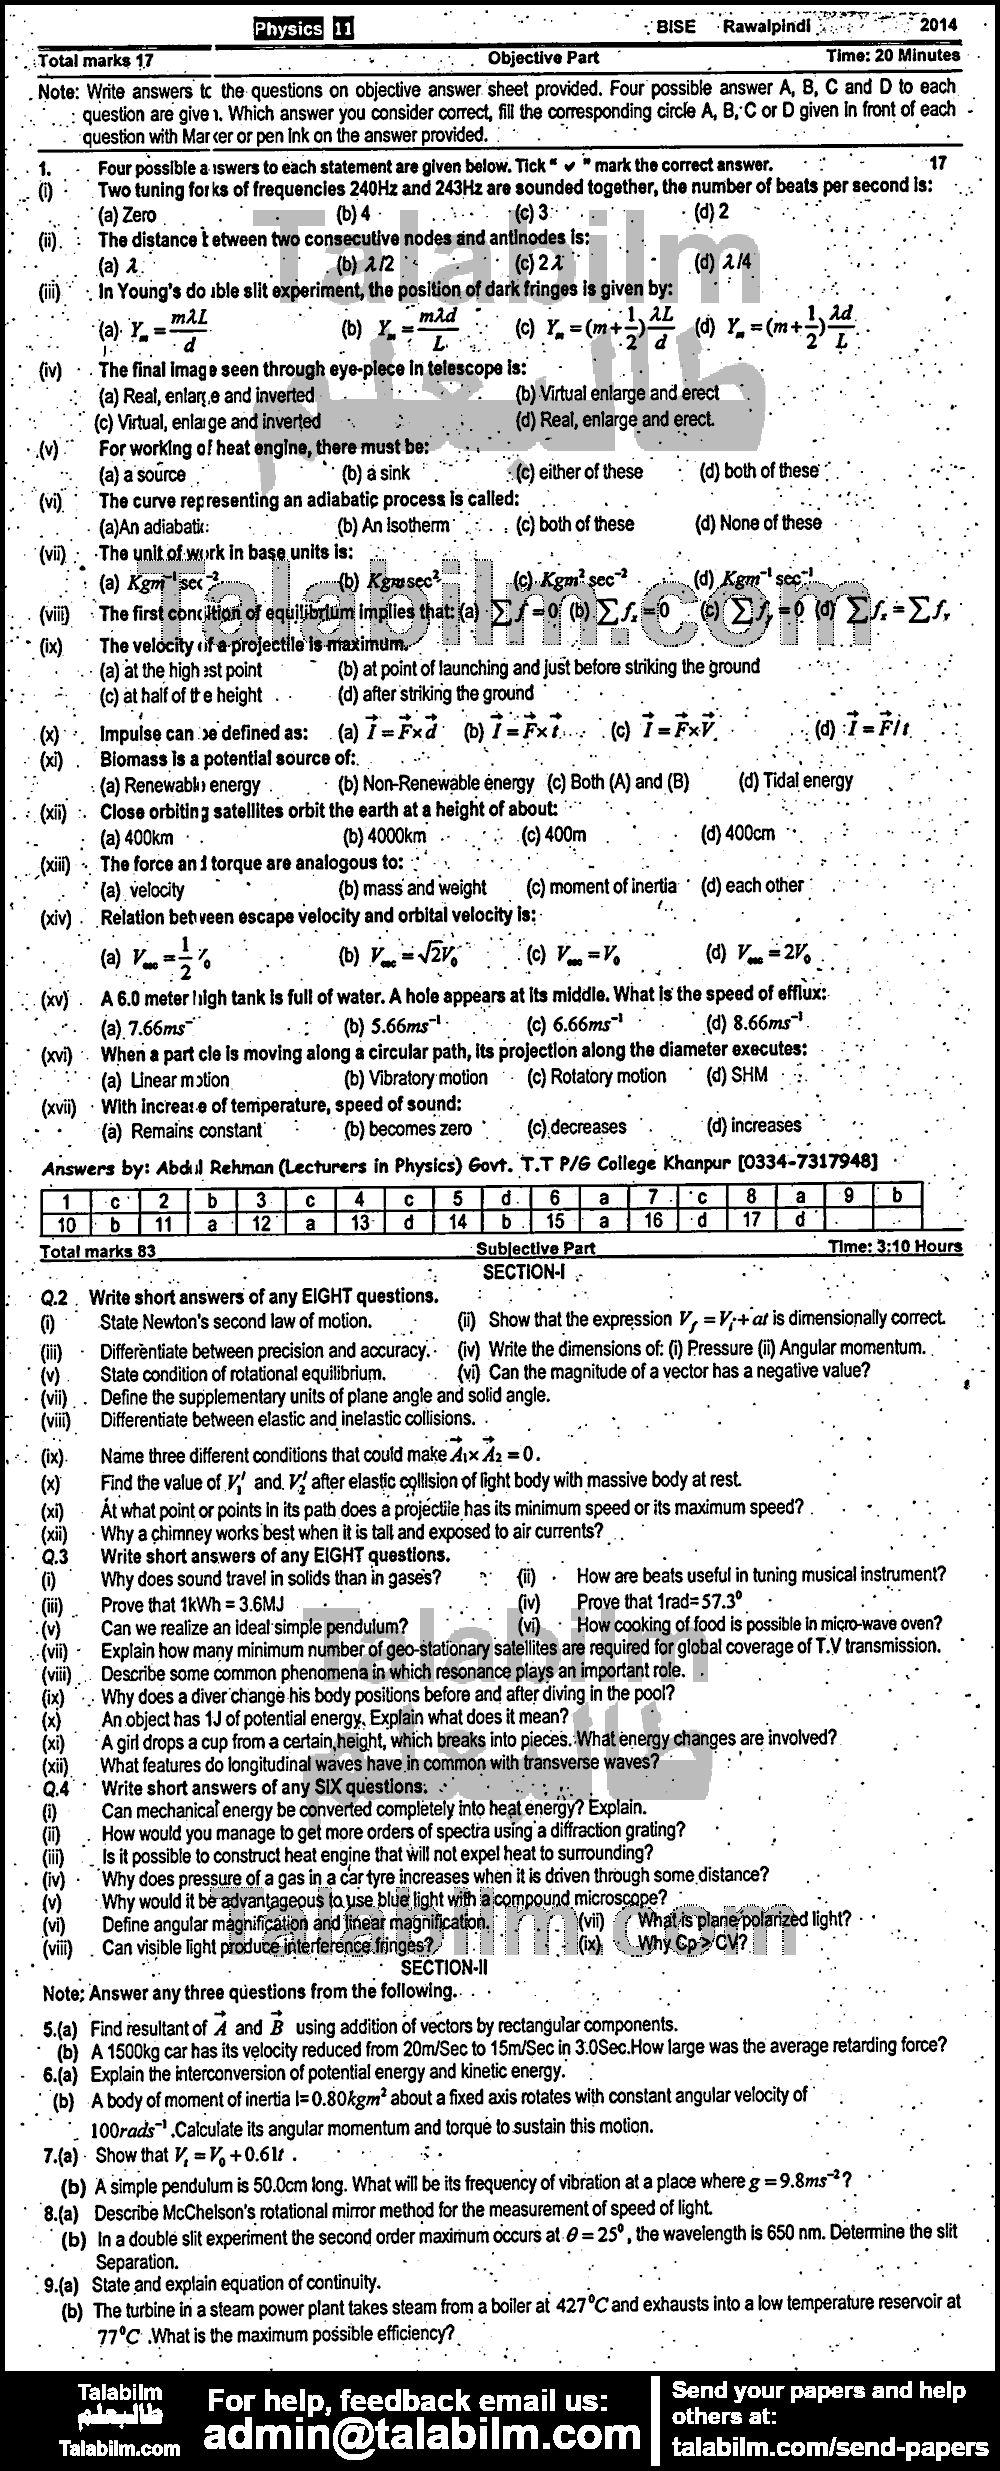 Physics 0 past paper for Group-II 2014